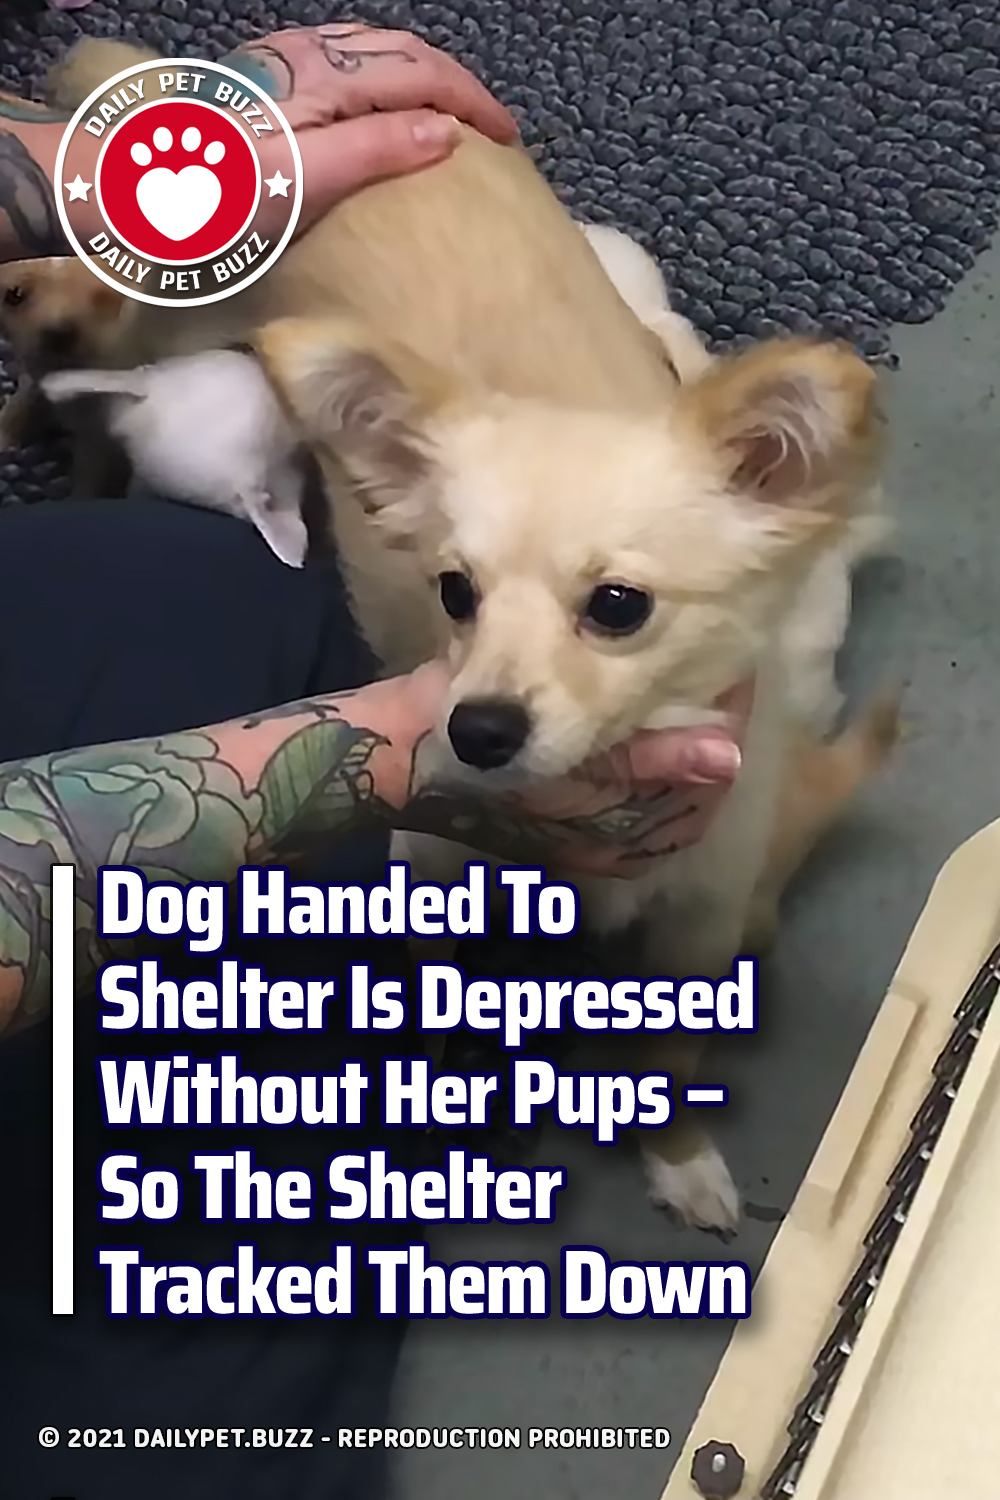 Dog Handed To Shelter Is Depressed Without Her Pups – So The Shelter Tracked Them Down